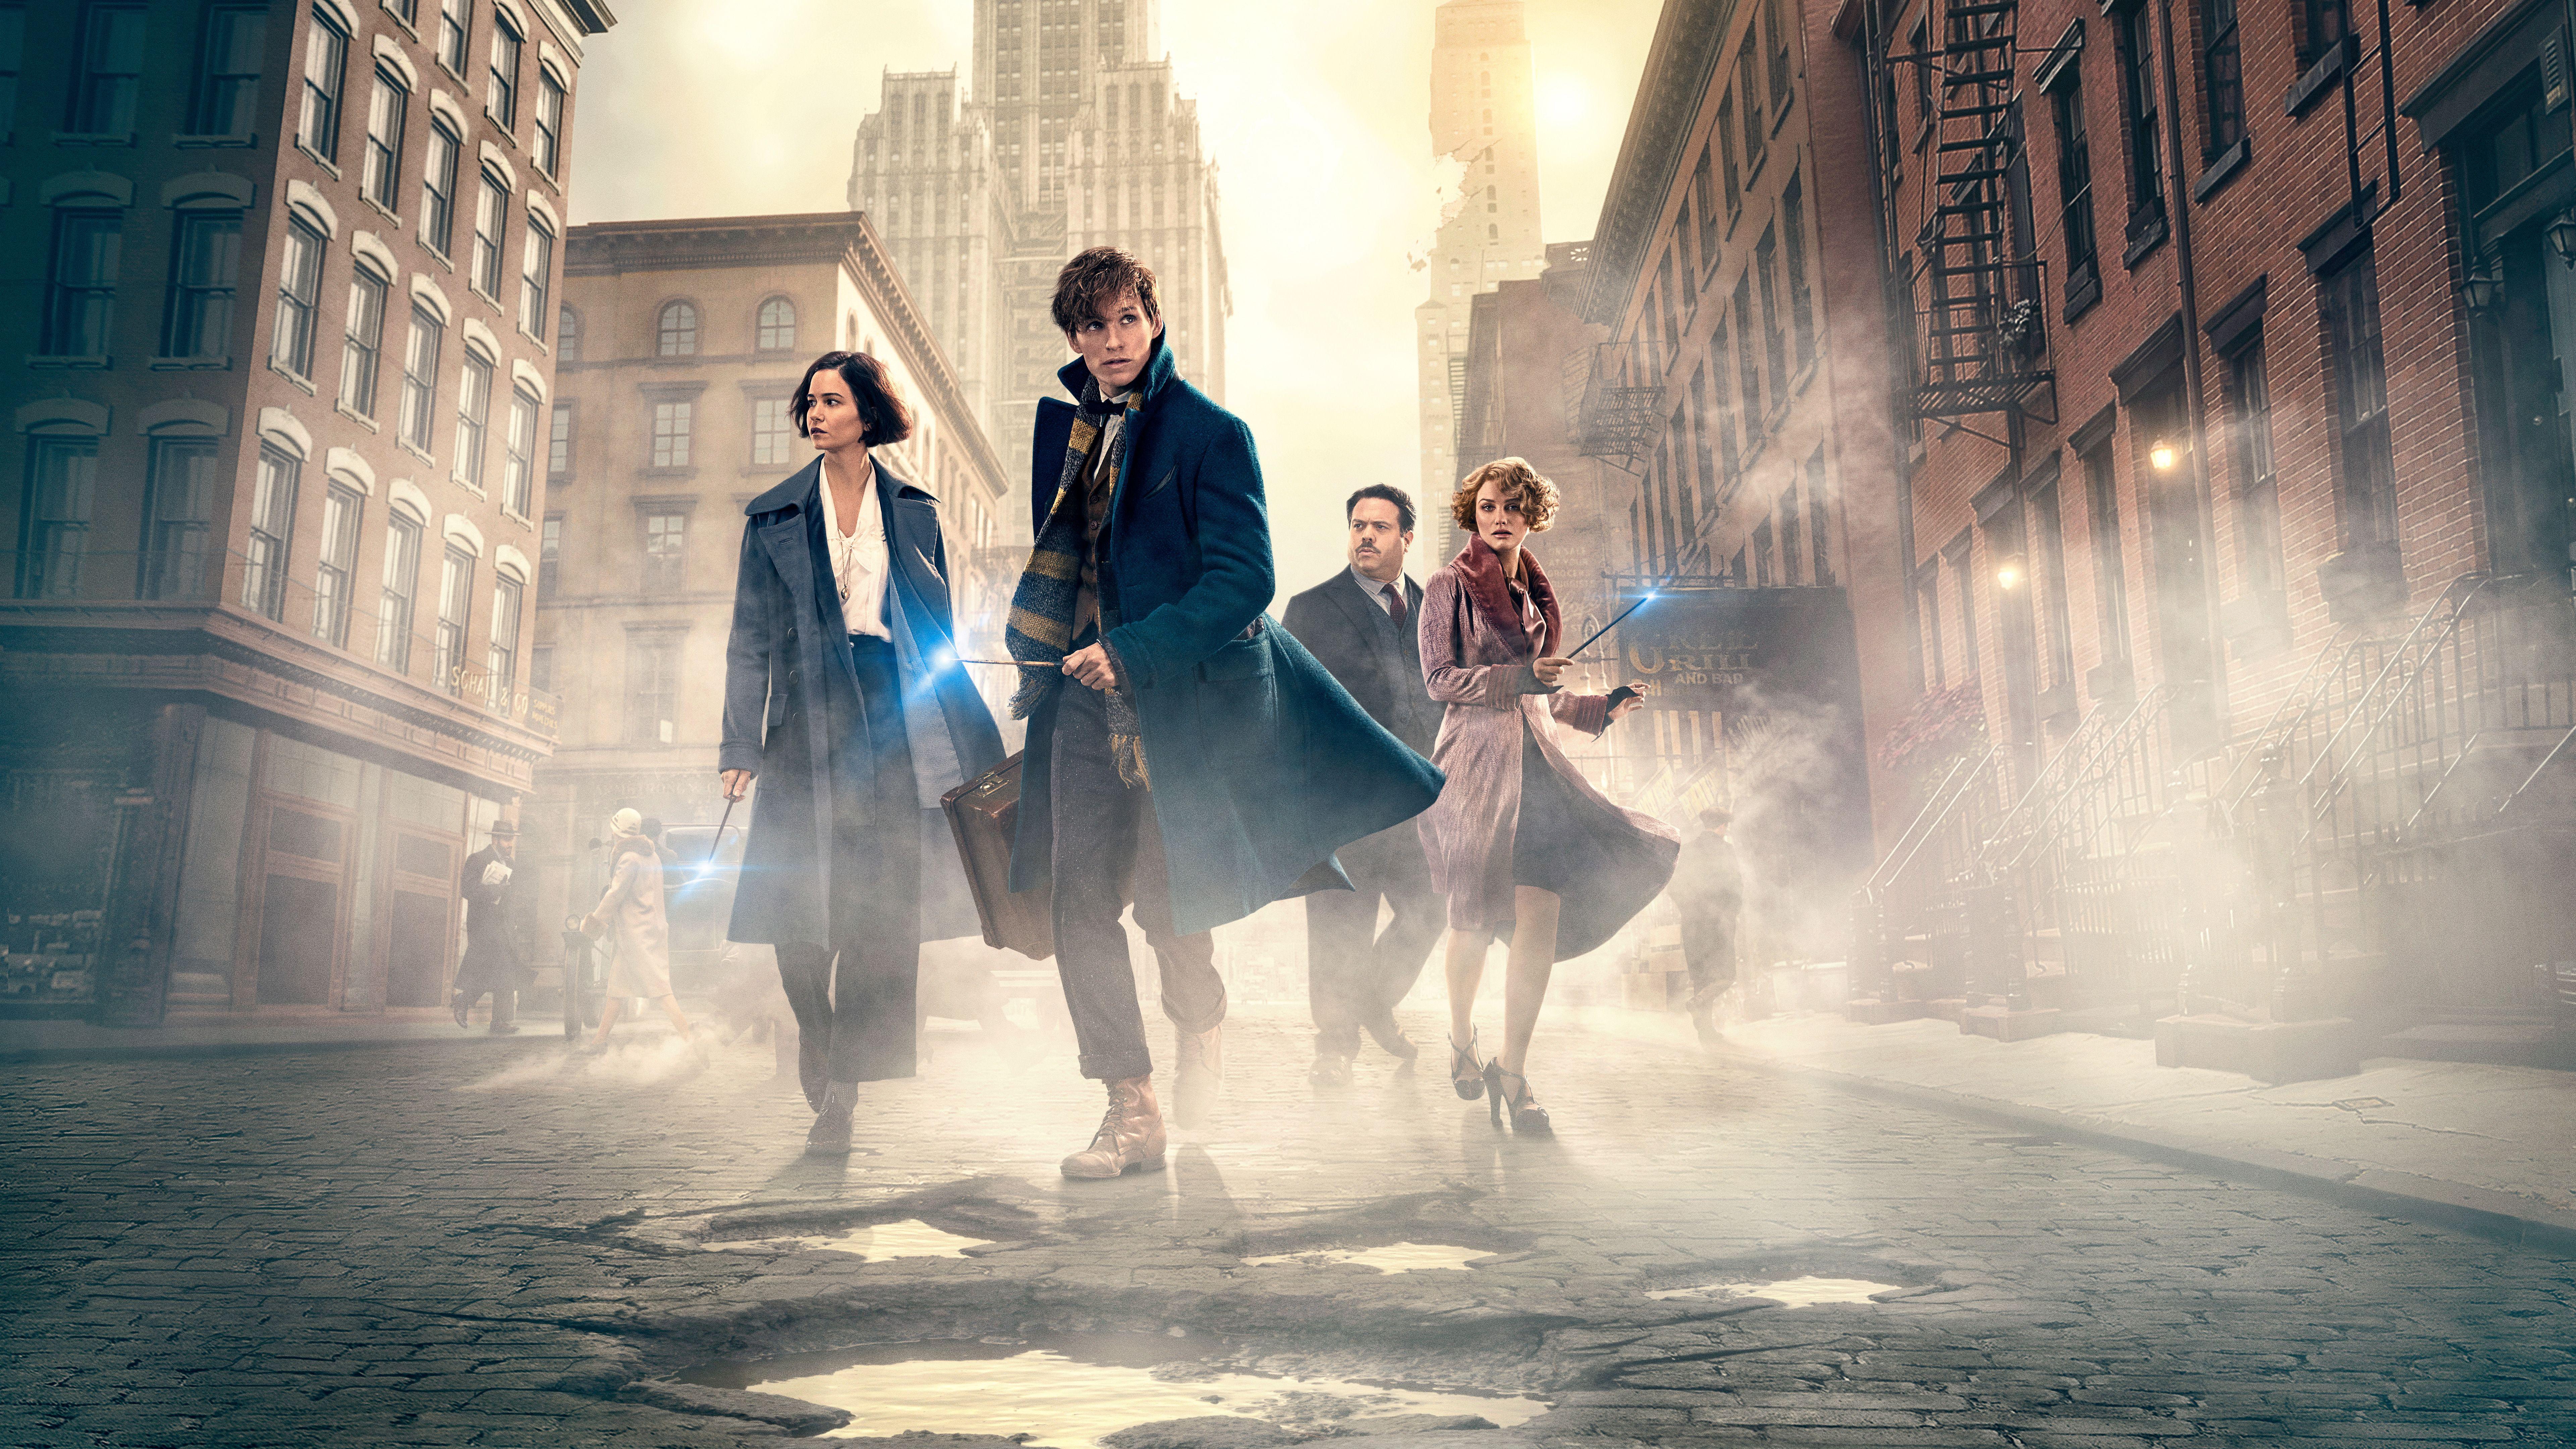 Wallpaper Fantastic Beasts and Where to Find Them, HD, 4K, 5K